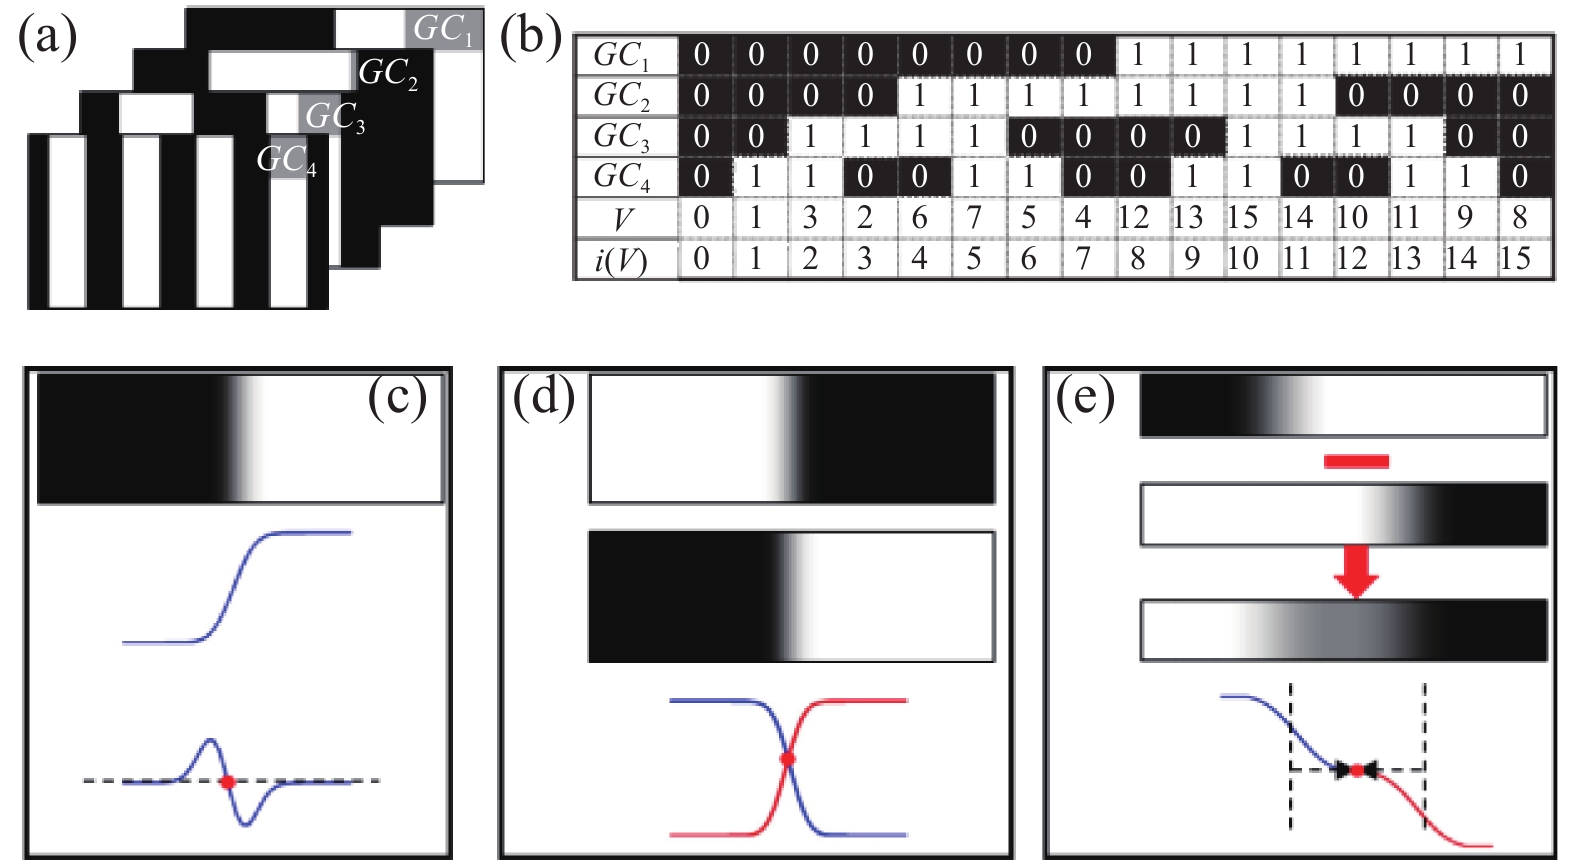 Direct Gray-coded coding technique. (a) Projected patterns; (b) Decoding process of Gray code; (c) Zero-crossing edge detection method; (d) Positive and negative edge detection method; (e) Improved zero-crossing edge detection method